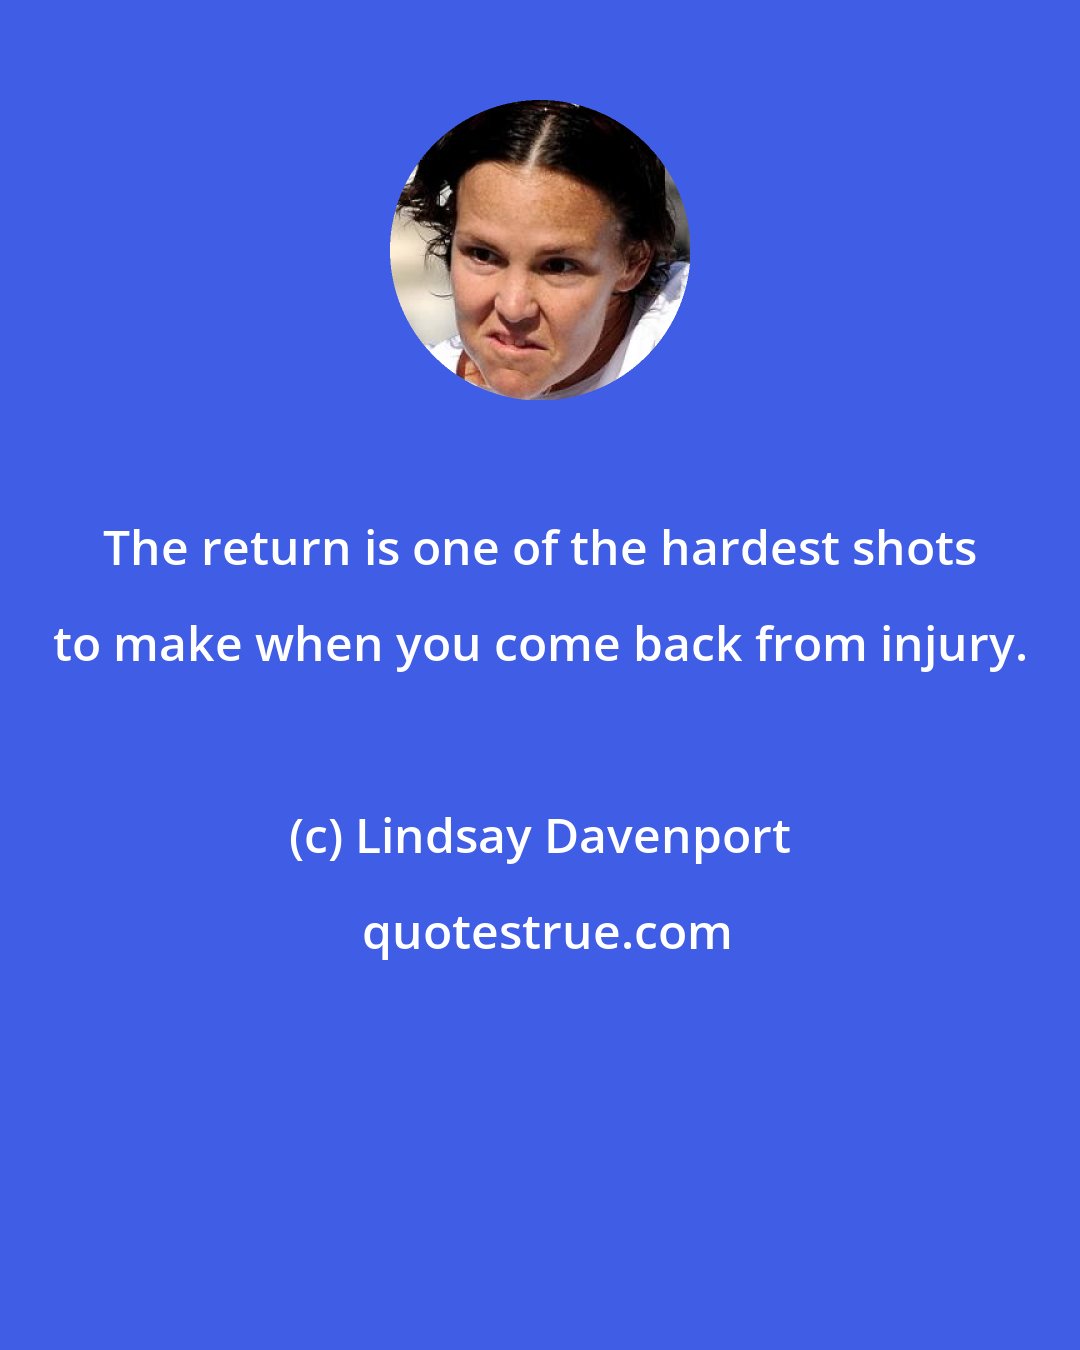 Lindsay Davenport: The return is one of the hardest shots to make when you come back from injury.